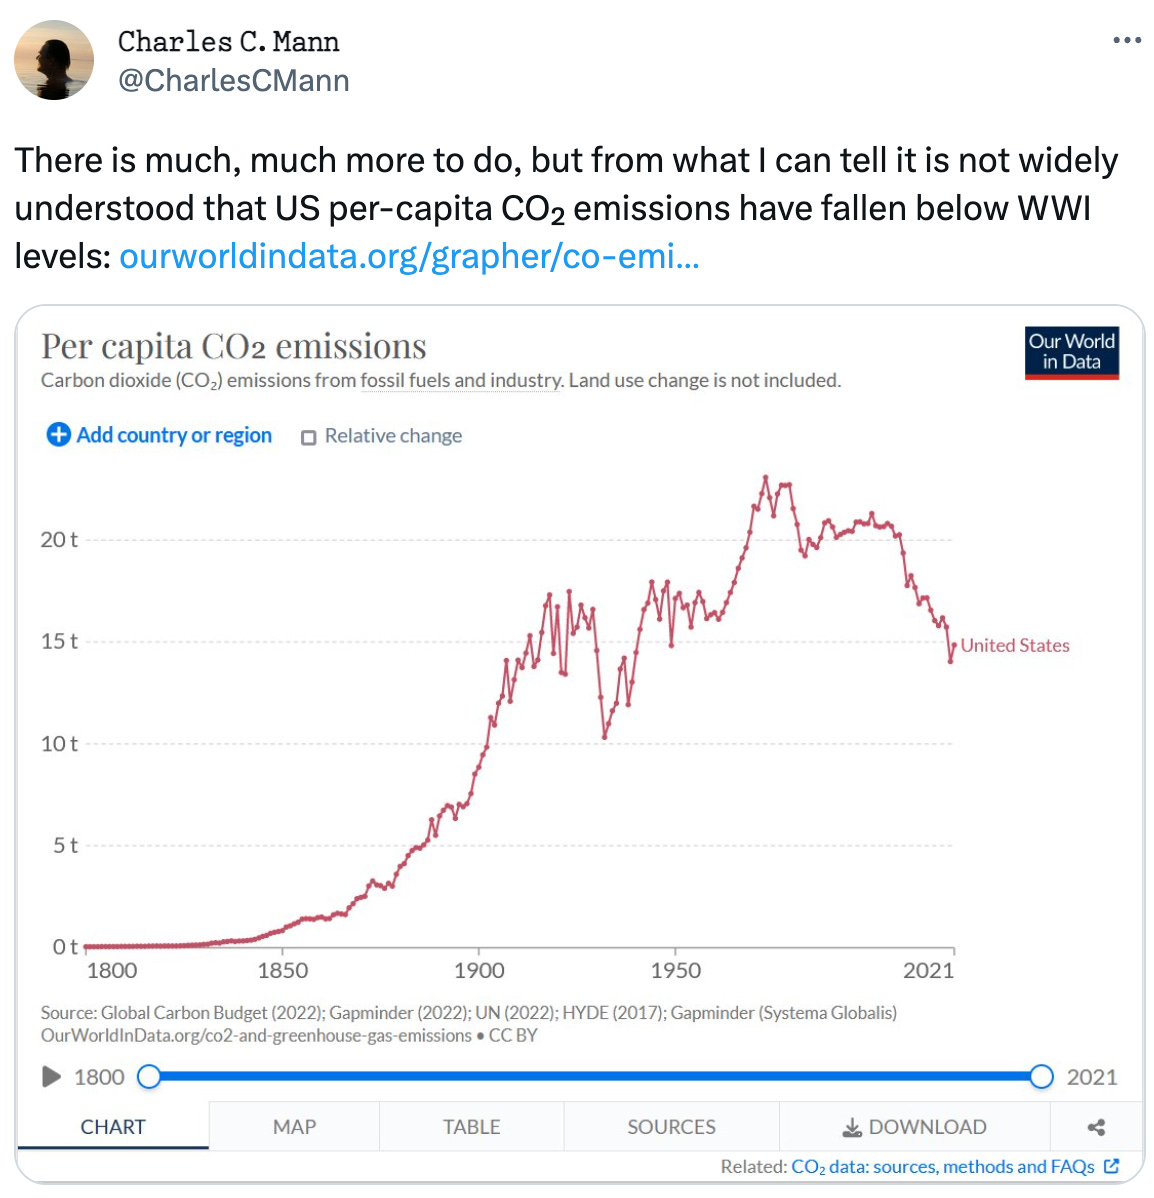  𝙲𝚑𝚊𝚛𝚕𝚎𝚜 𝙲. 𝙼𝚊𝚗𝚗 @CharlesCMann There is much, much more to do, but from what I can tell it is not widely understood that US per-capita CO₂ emissions have fallen below WWI levels: https://ourworldindata.org/grapher/co-emissions-per-capita?tab=chart&country=~USA